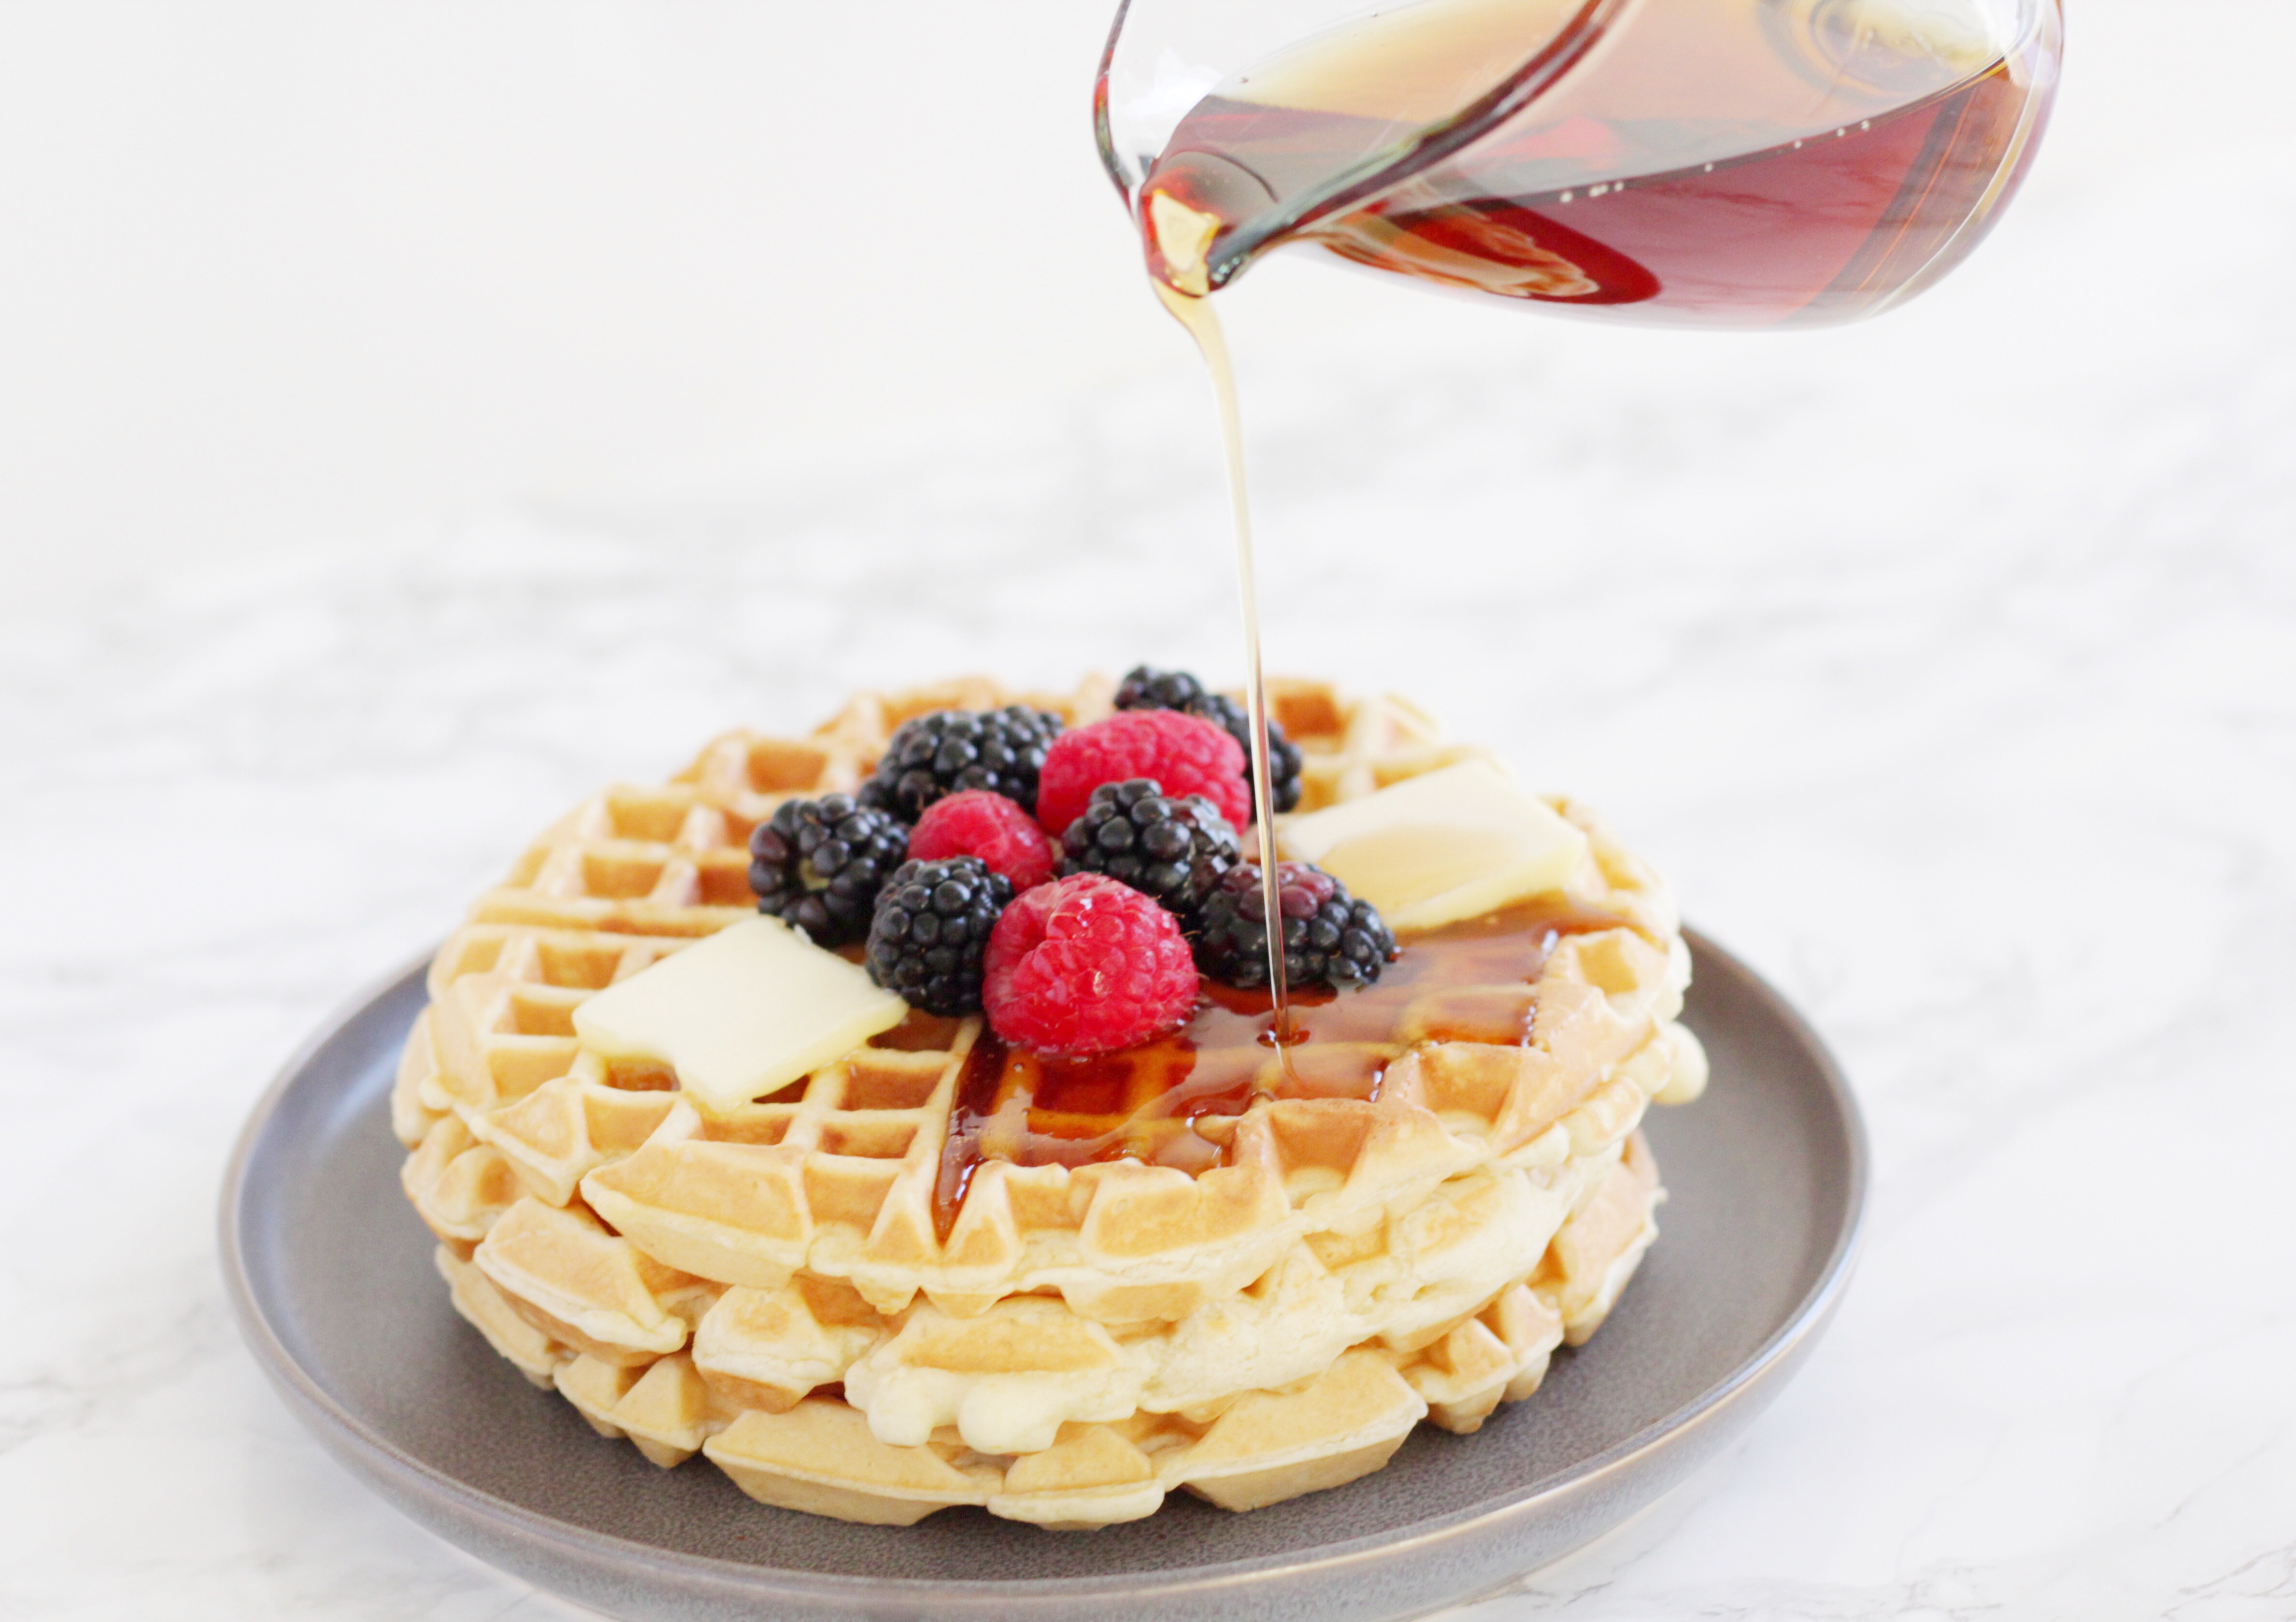 10 delicious brunch recipes that are perfect for Easter or any time of the year!